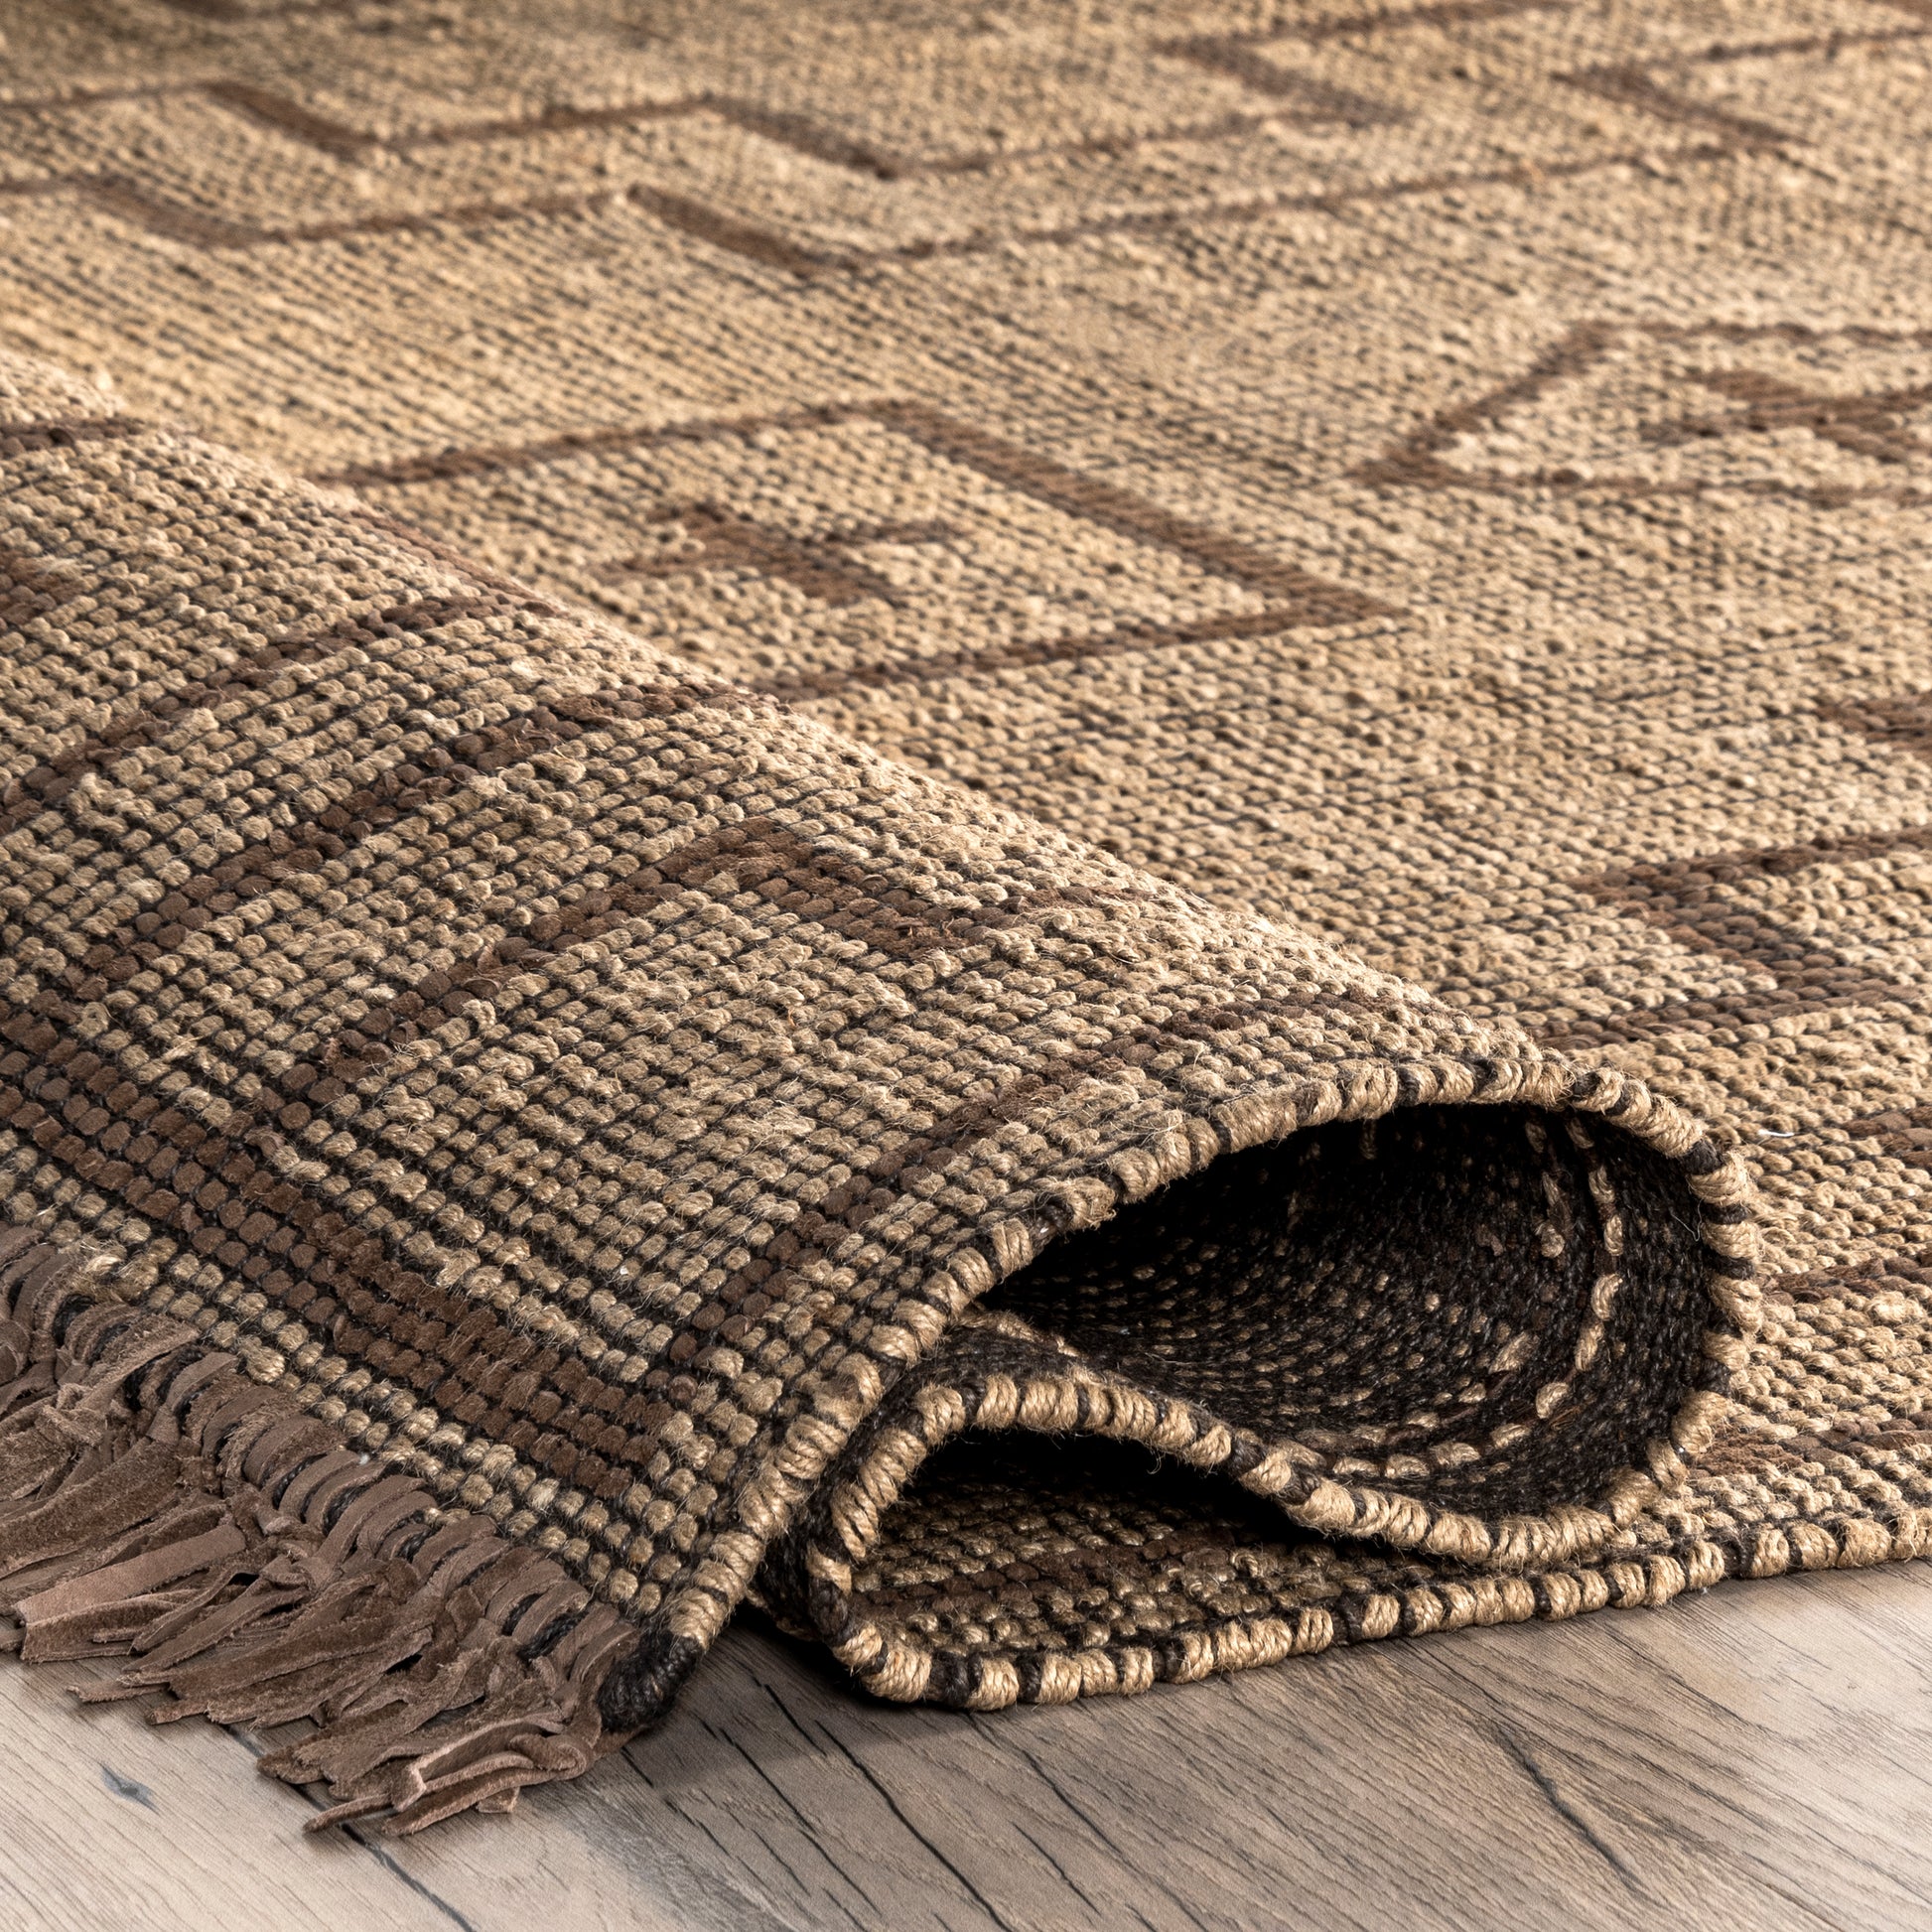 Nuloom Maxine And Inspired Nma3572A Natural Area Rug